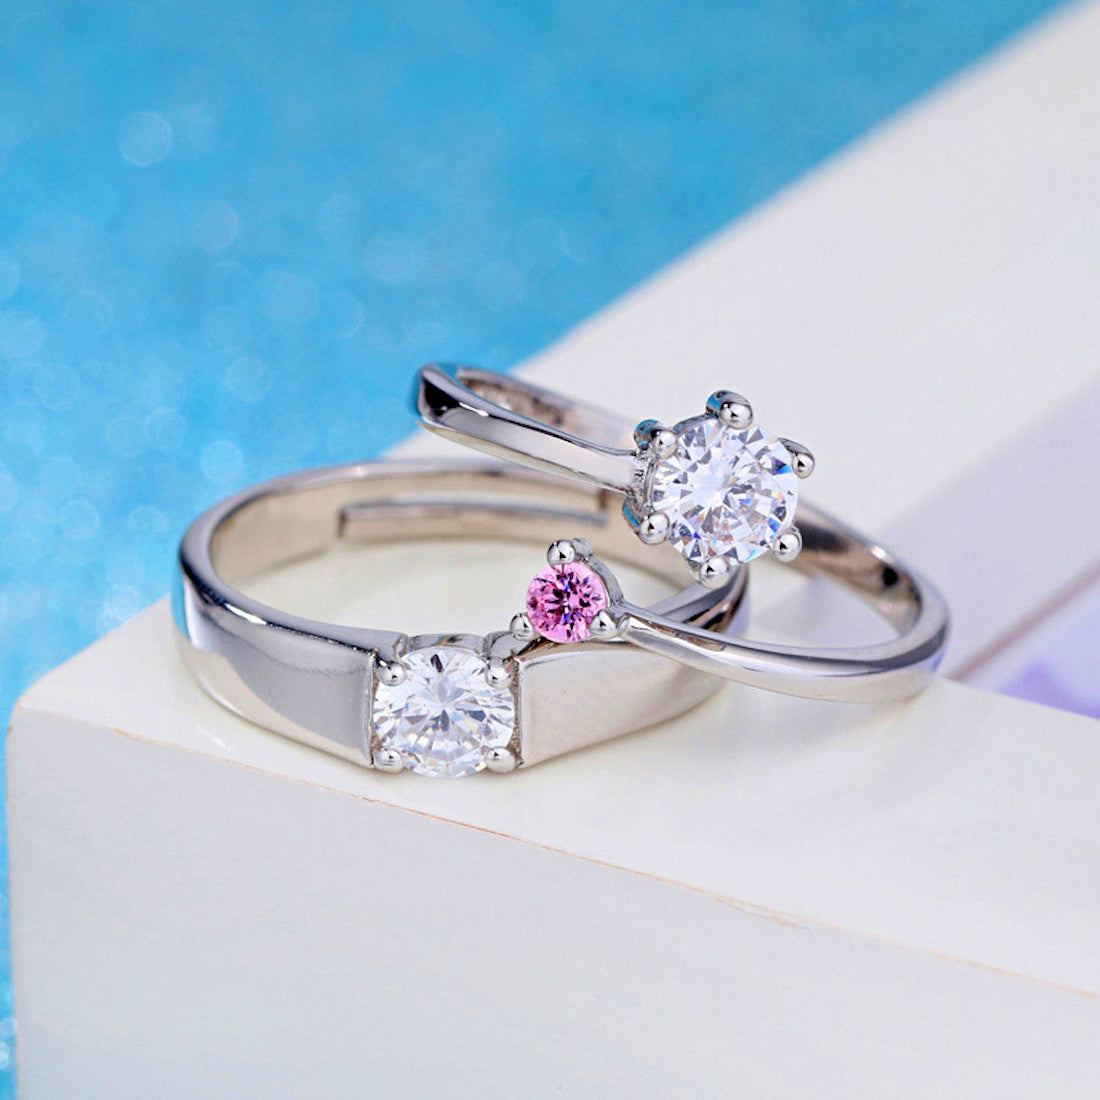 Tips for Buying an Engagement Ring: How to Choose the Right One